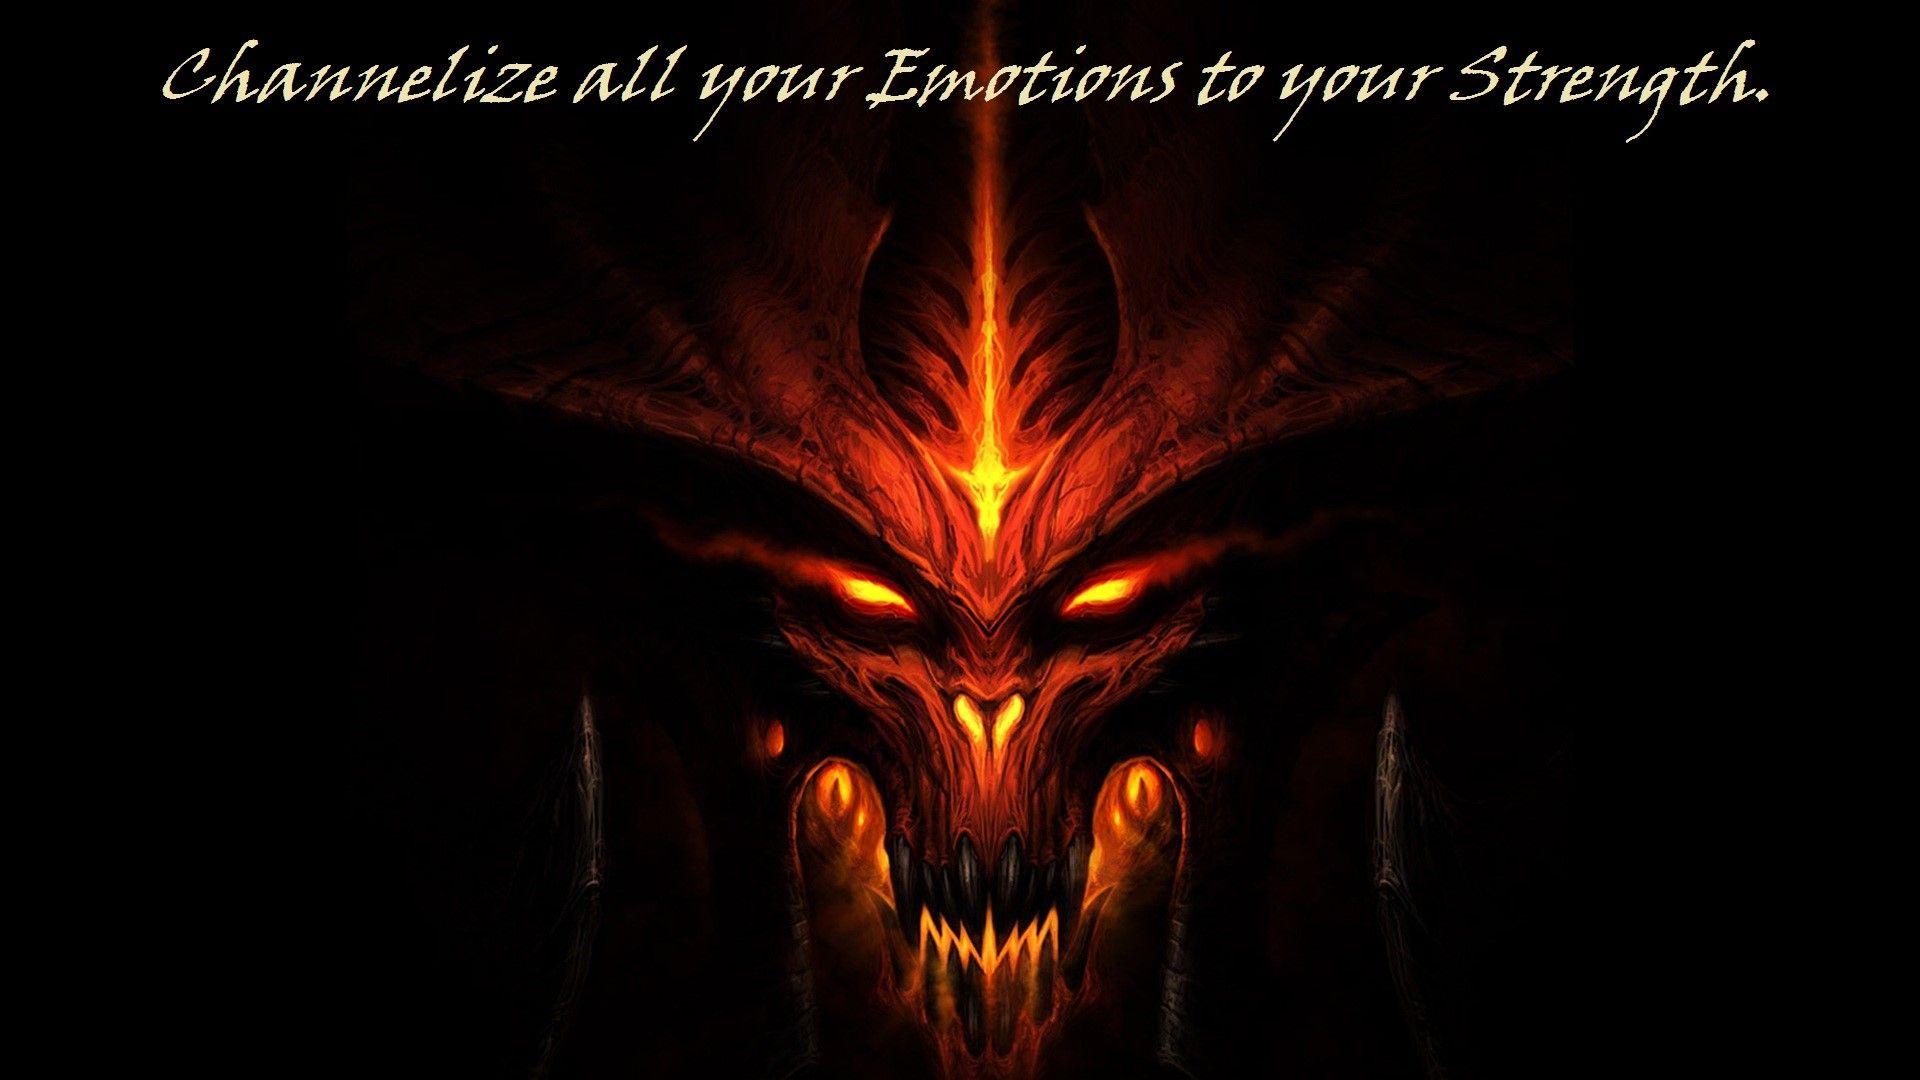 Channelize all your Emotions to your Strength.”- Quotes on Strength